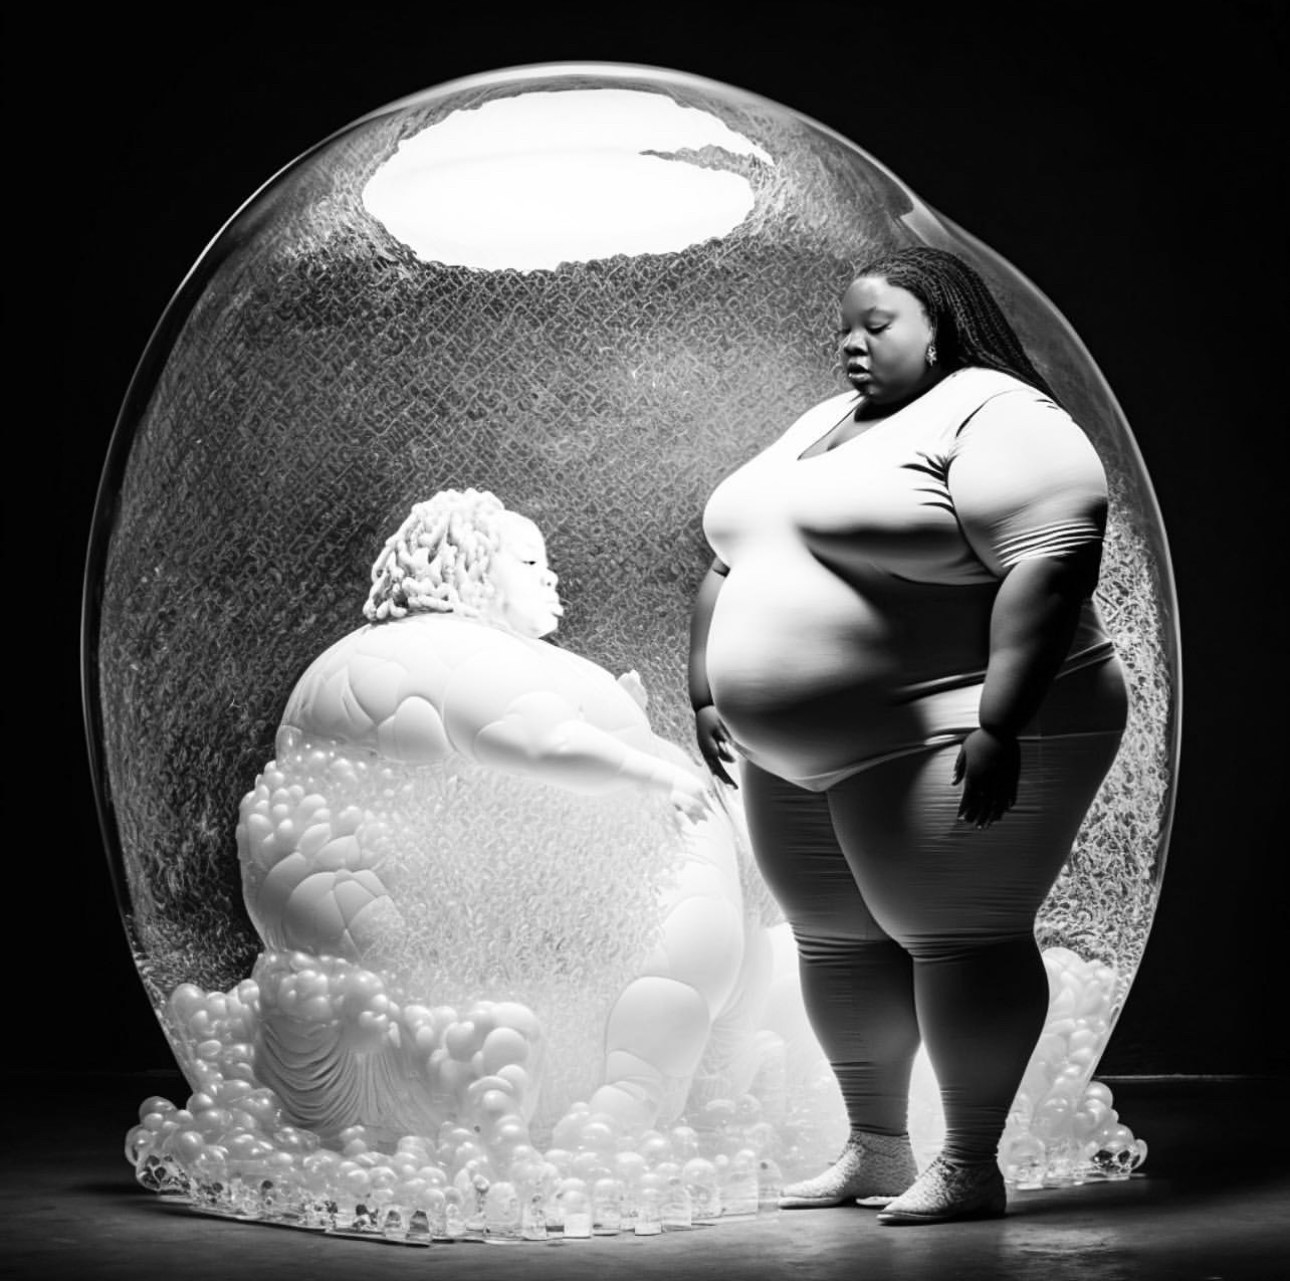 Black and white AI art of a Fat, Black woman looking at what appears to be a statue in a bubble